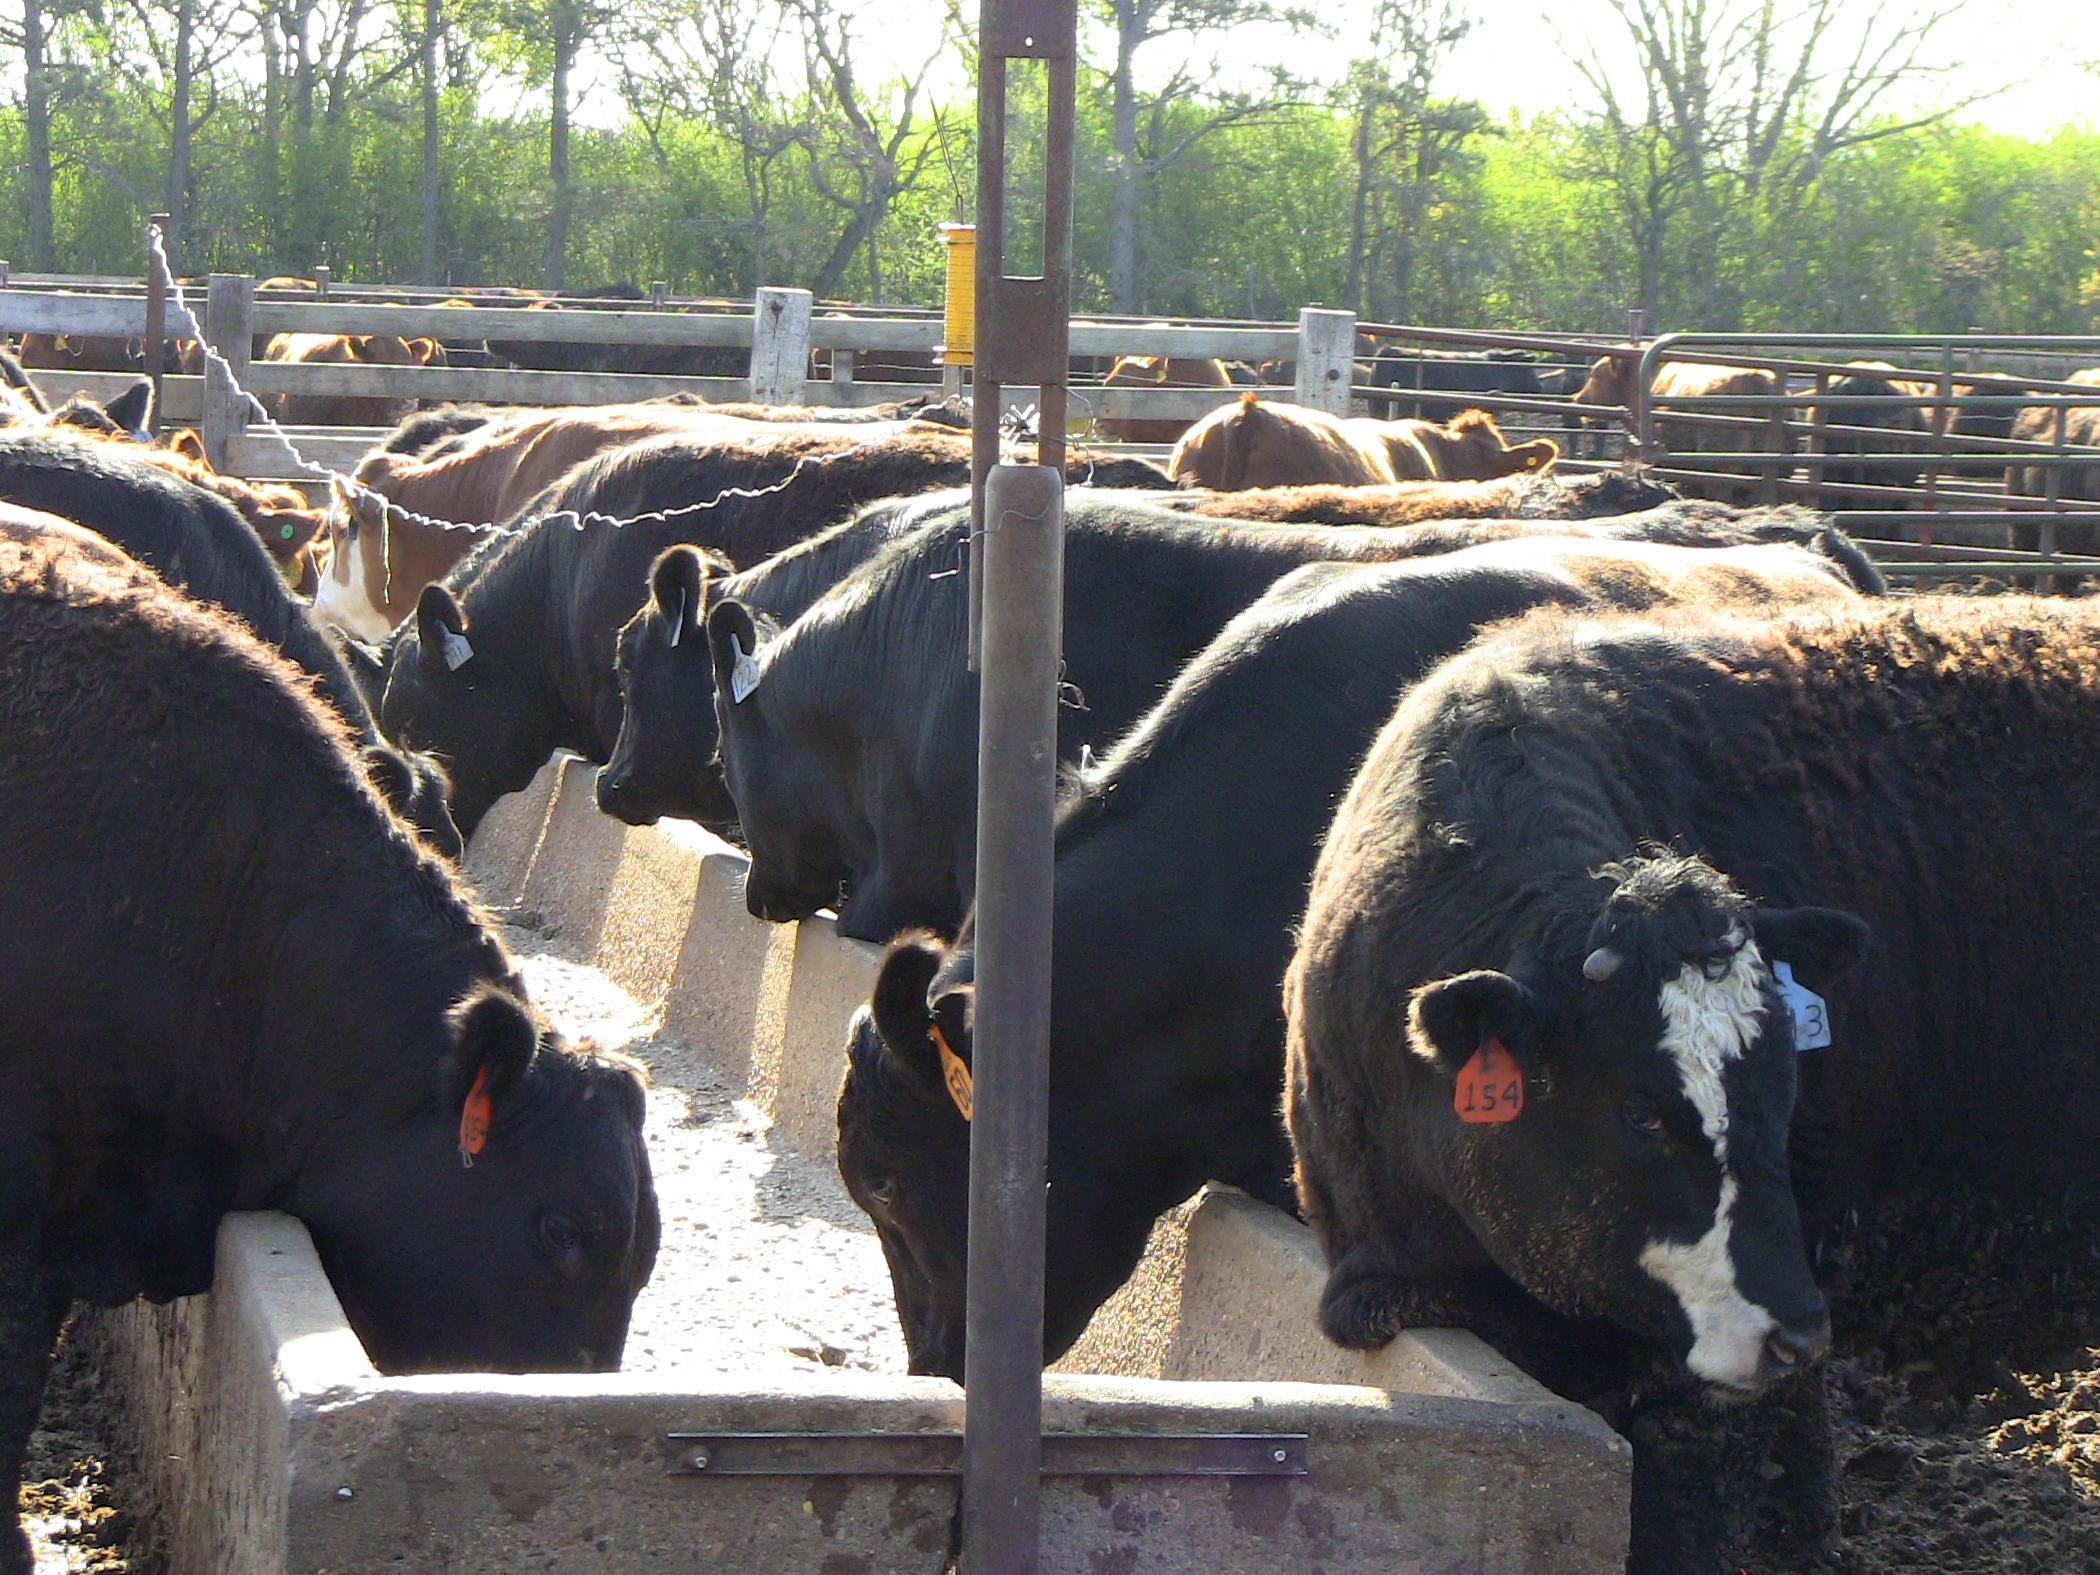 A group of mixed cattle feeding in a feedlot.